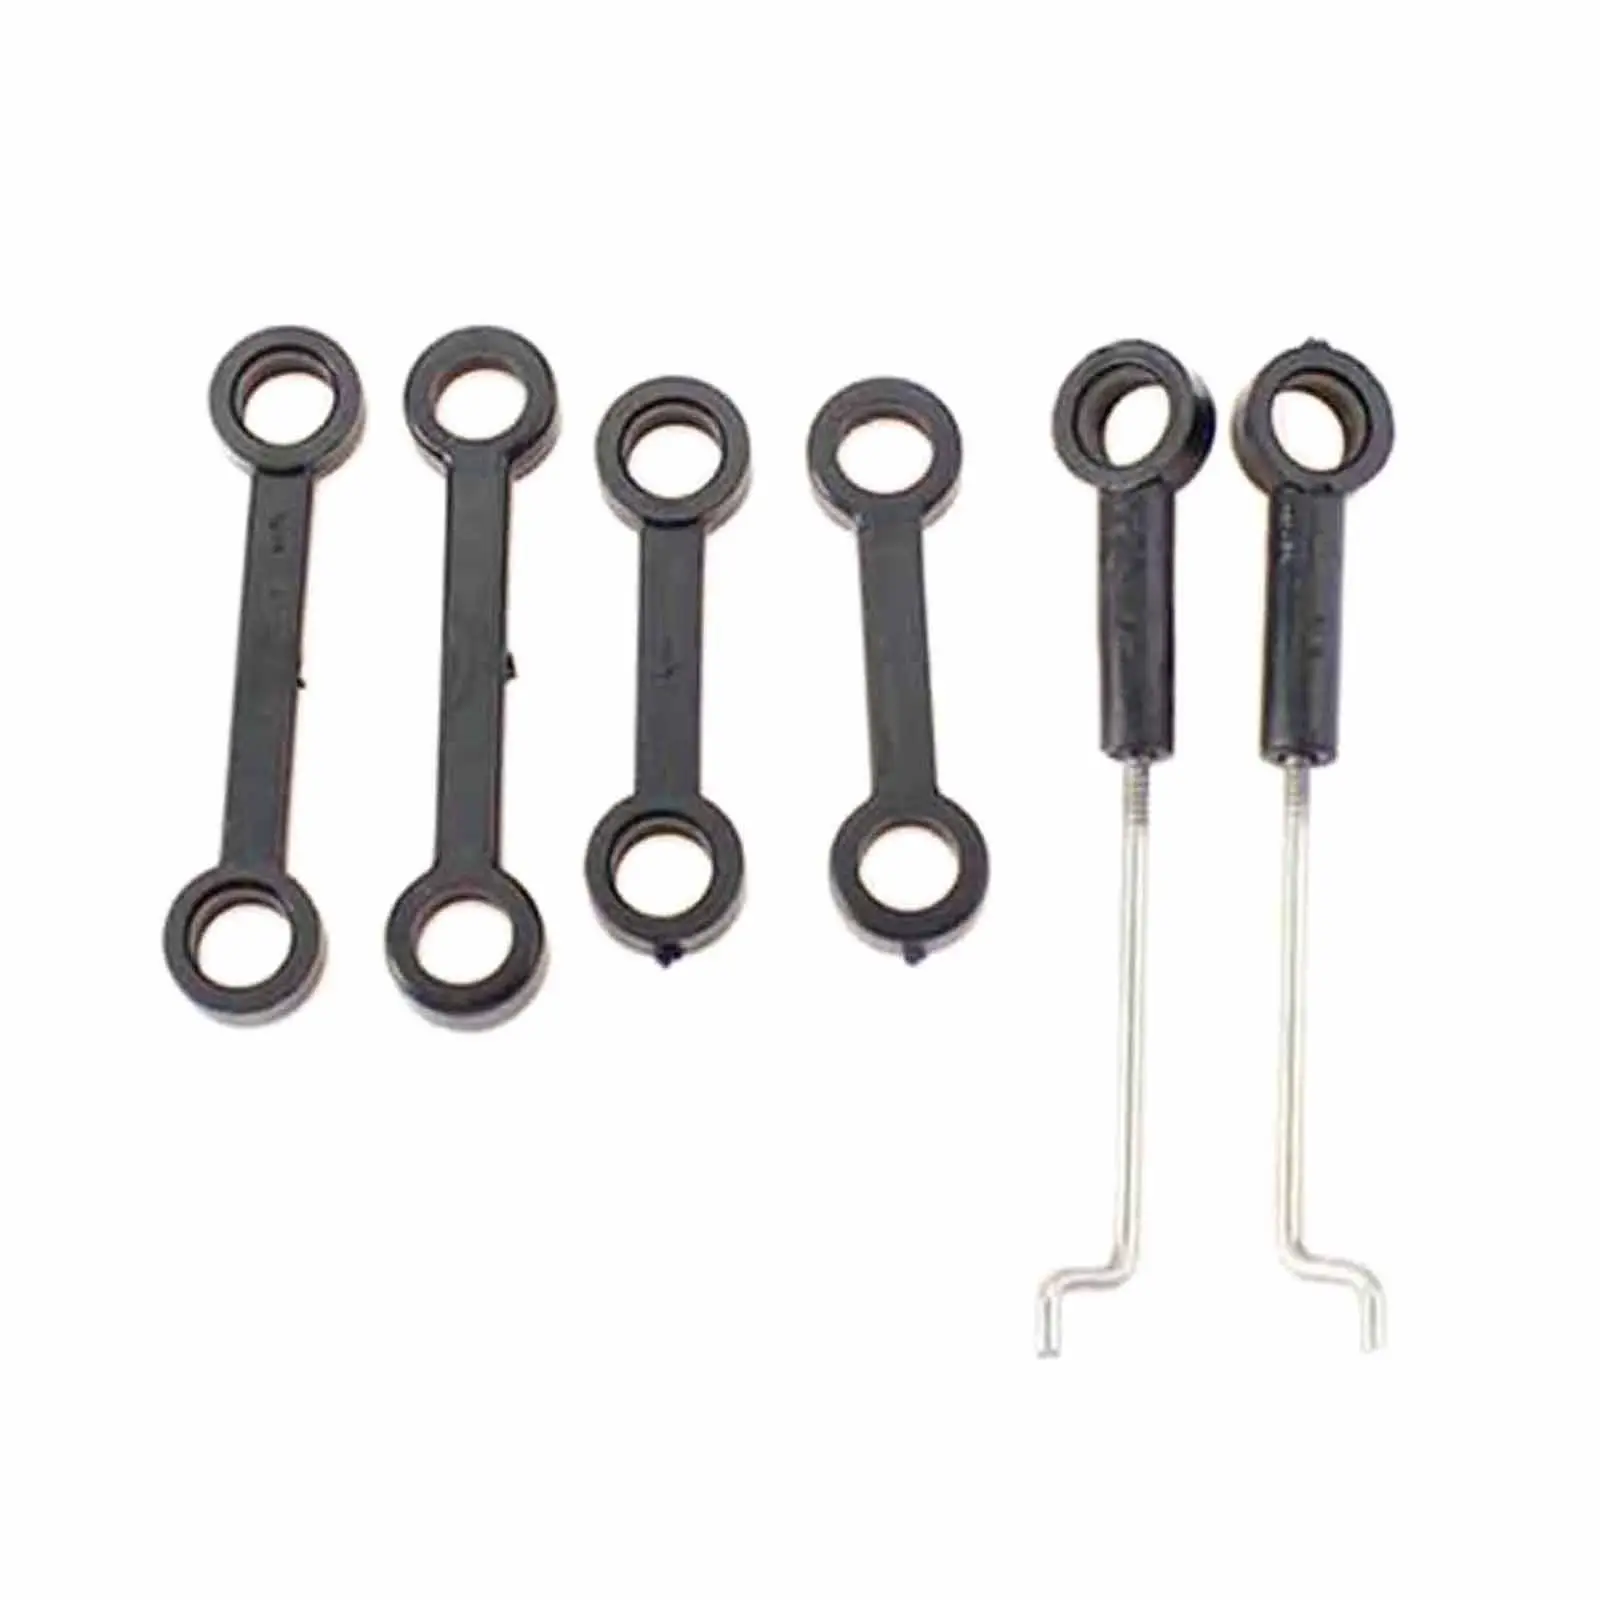 6 Pieces RC Helicopter Connect Buckle Spare Parts for V912 Airplane Quadcopter DIY Modified Parts